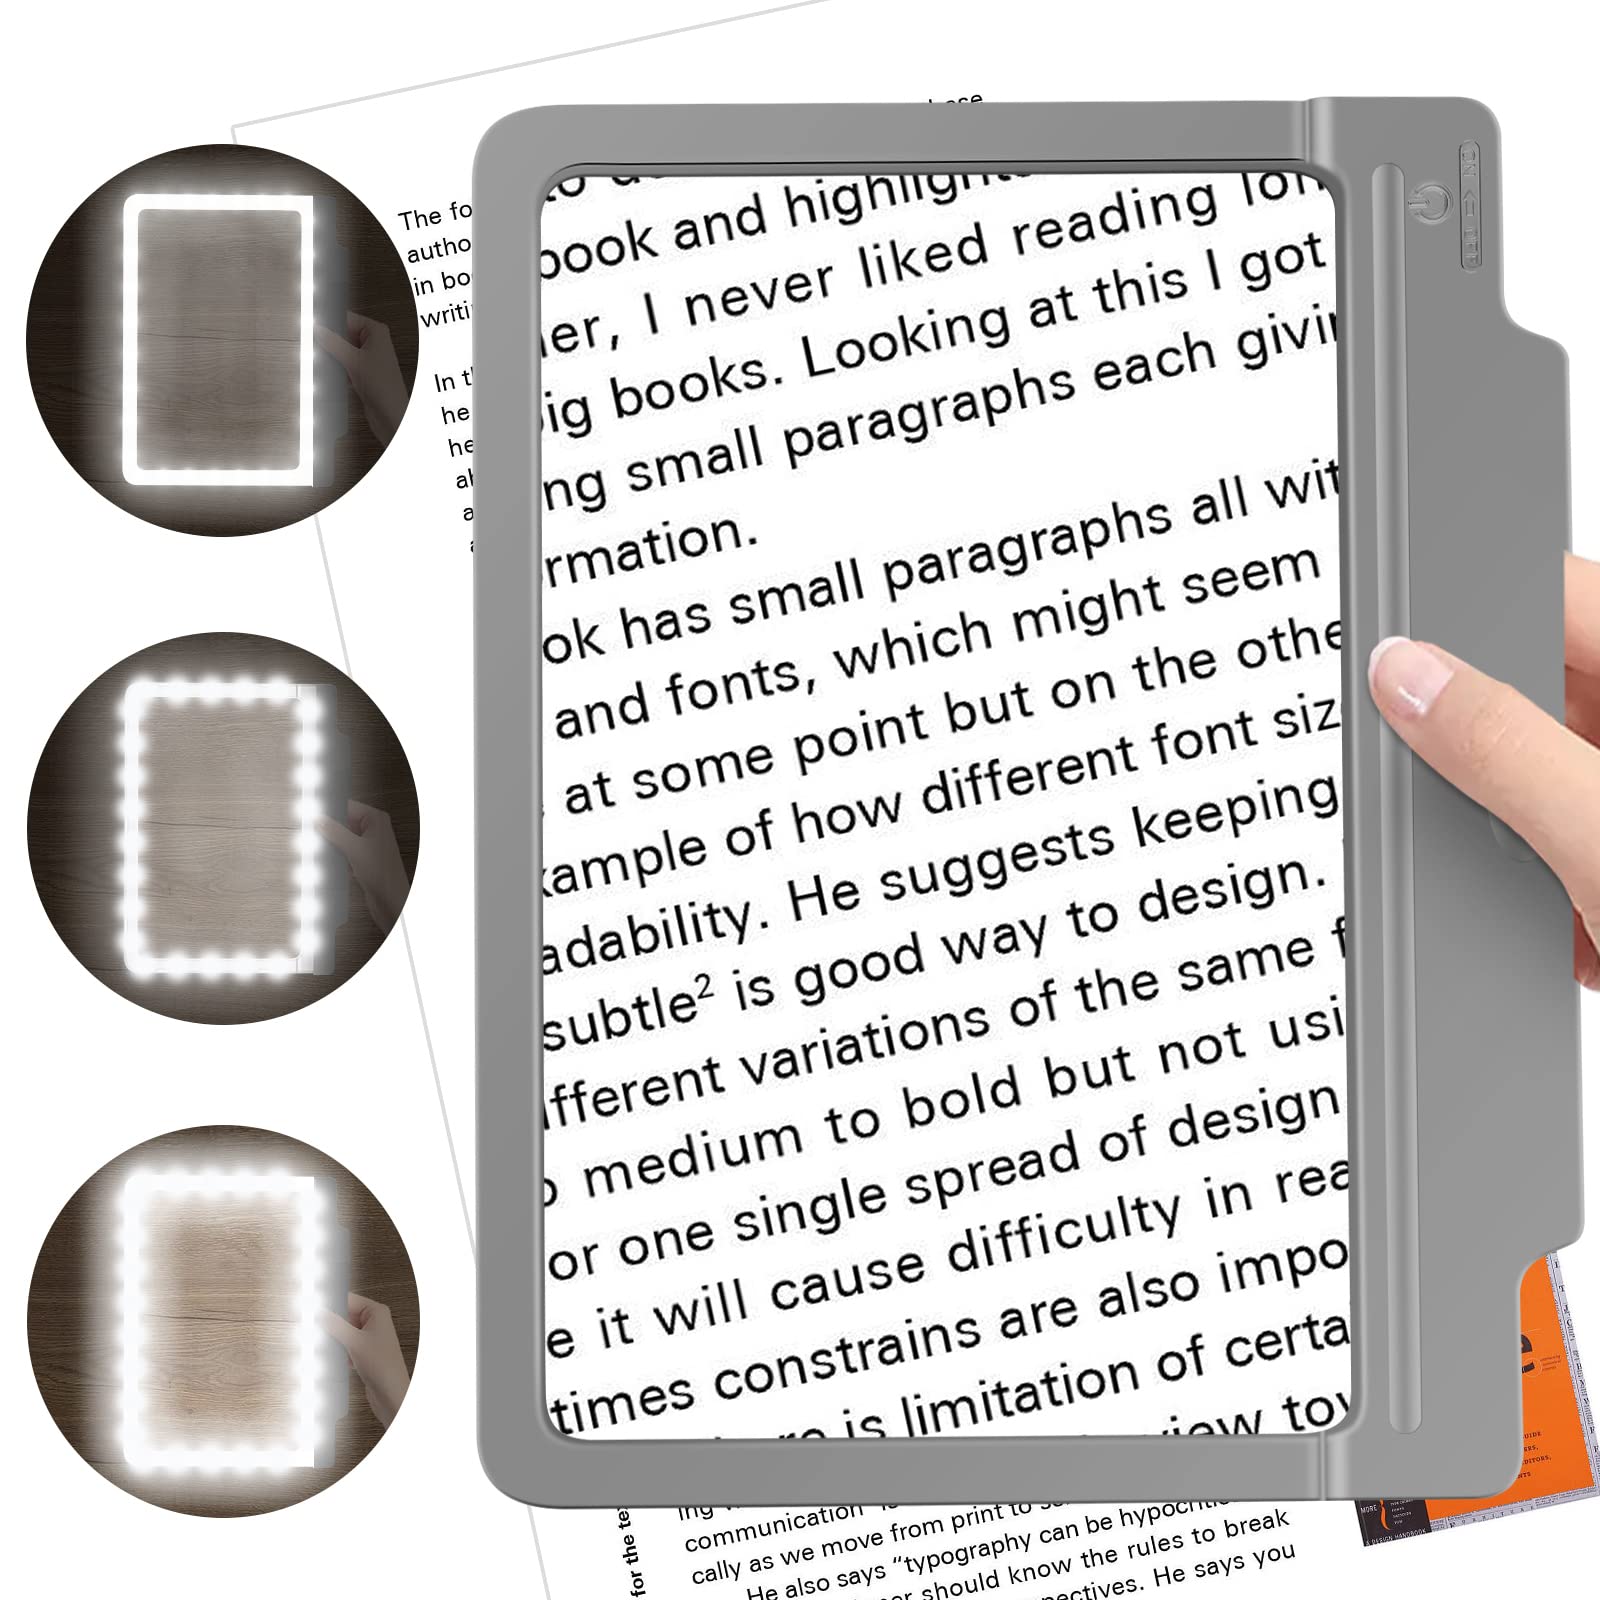 4X Magnifying Glass for Reading, Large and Lightweight Magnifier with 36 Ultra-Bright Dimmer LED Lights Provide Full-Page Viewing Area Evenly Lit Perfect for Low Vision Person and Seniors(Grey)